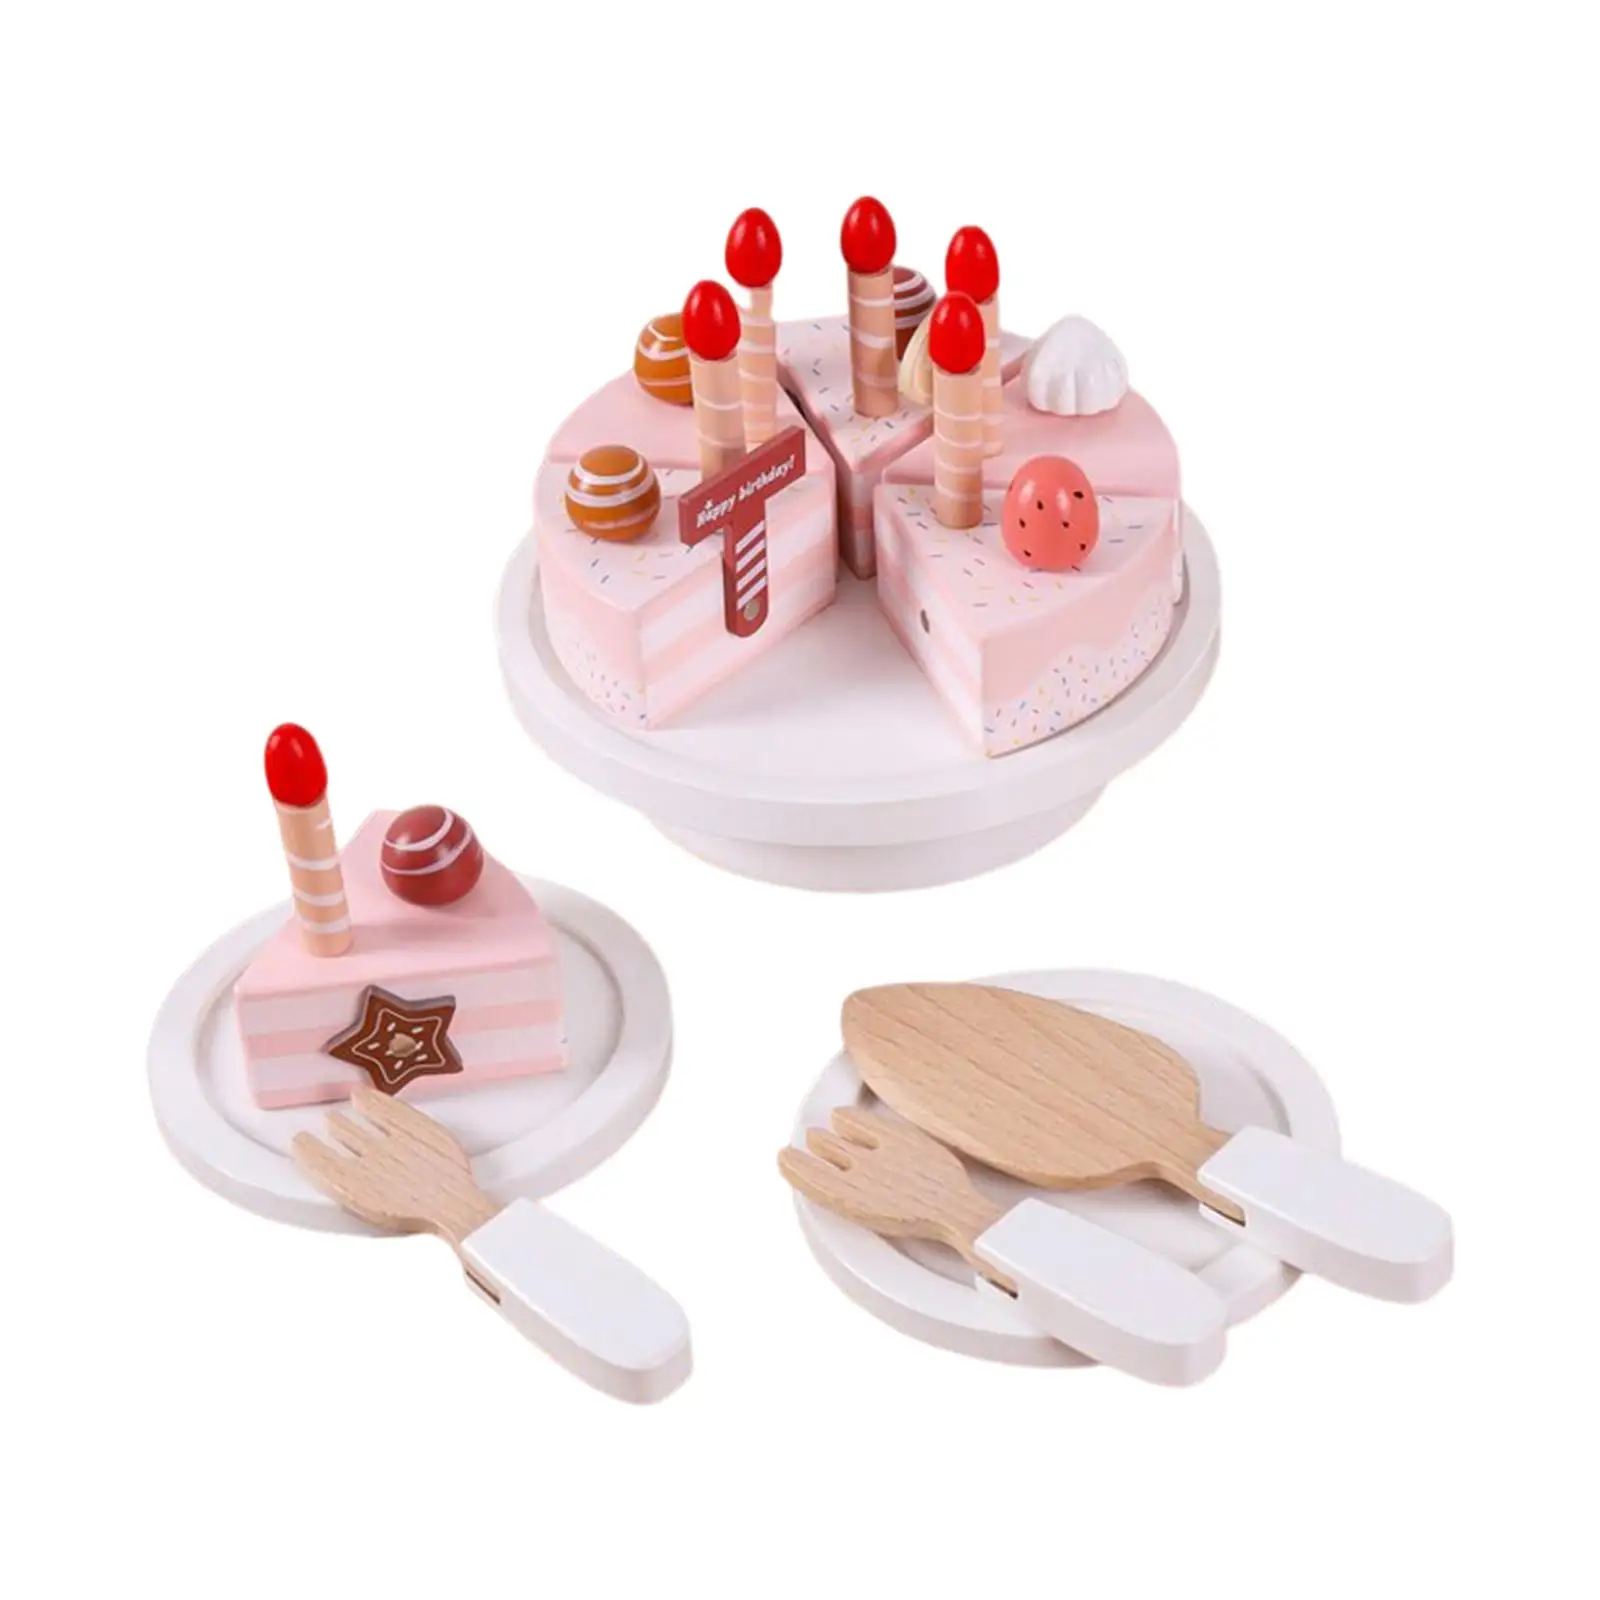 Simulation Birthday Cake Toy Education with Candles DIY Pretend Play for Girls Kids Boys Ages 3 Years and up Birthday Gifts